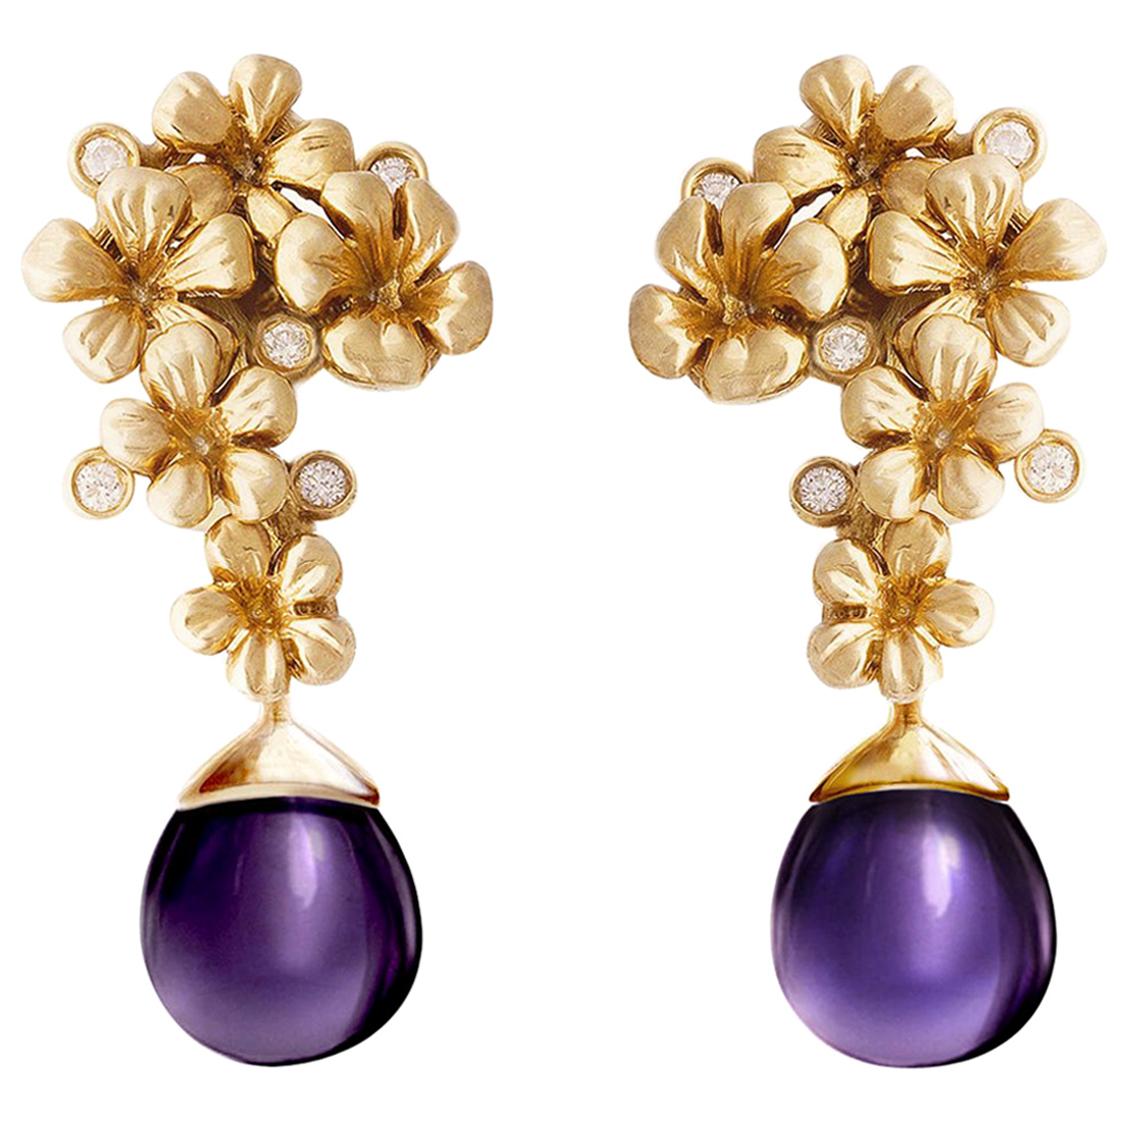 Plum Blossom Earrings by the Artist in Yellow Gold with Round Diamonds